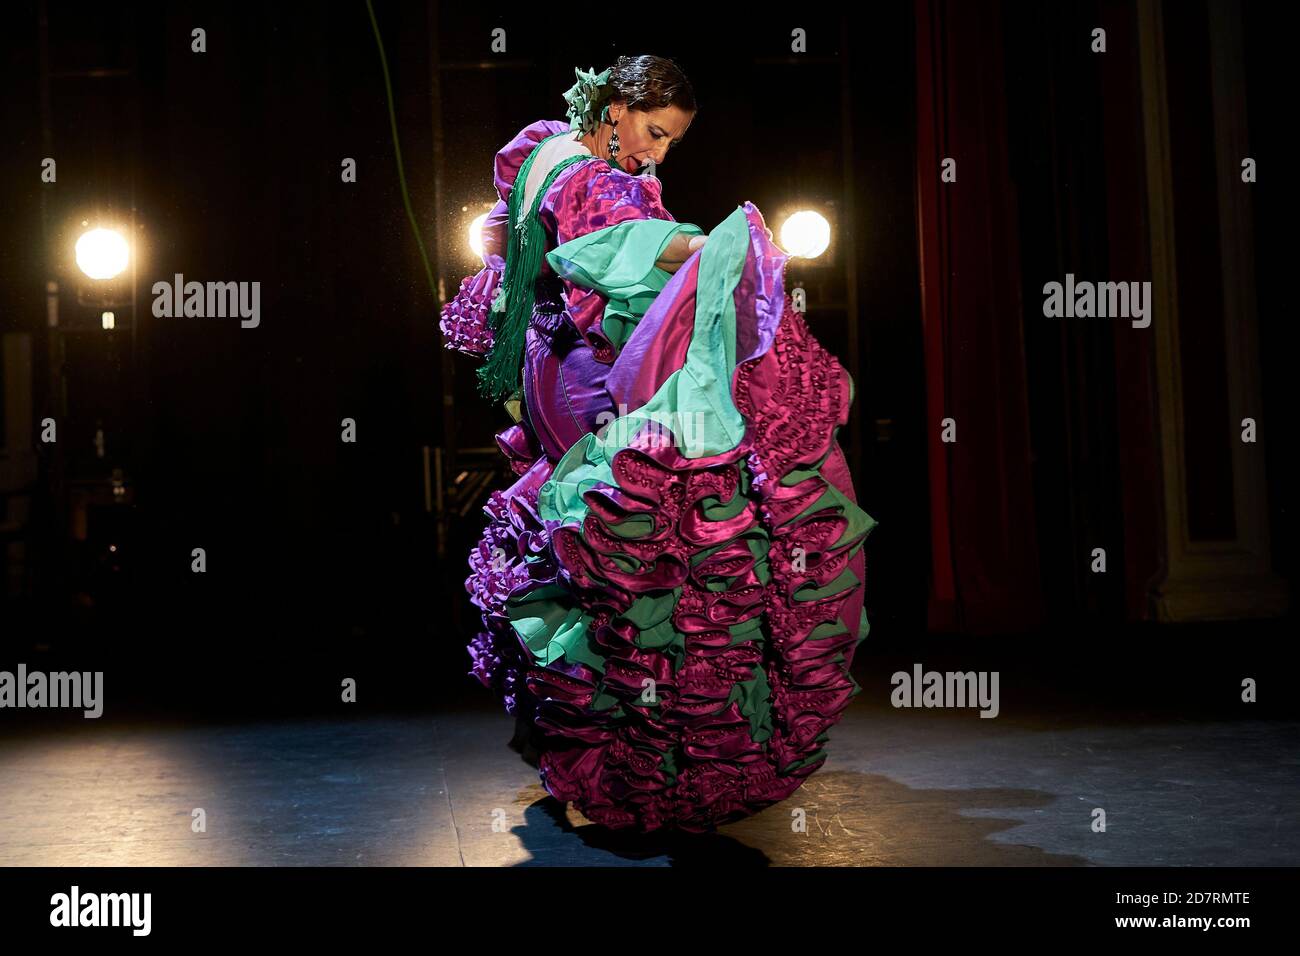 Alcala de Henares, Spain. 24 October, 2020. A flamenco dancer during the 'Volver' flamenco dance festival at Cervantes theater in Alcala de Henares, Spain. In Madrid, the capacity limitation in theaters is between 50% and 75% as a preventive measure against Covid-19. Credit: May Robledo/Alfa Images/Alamy Live News Stock Photo